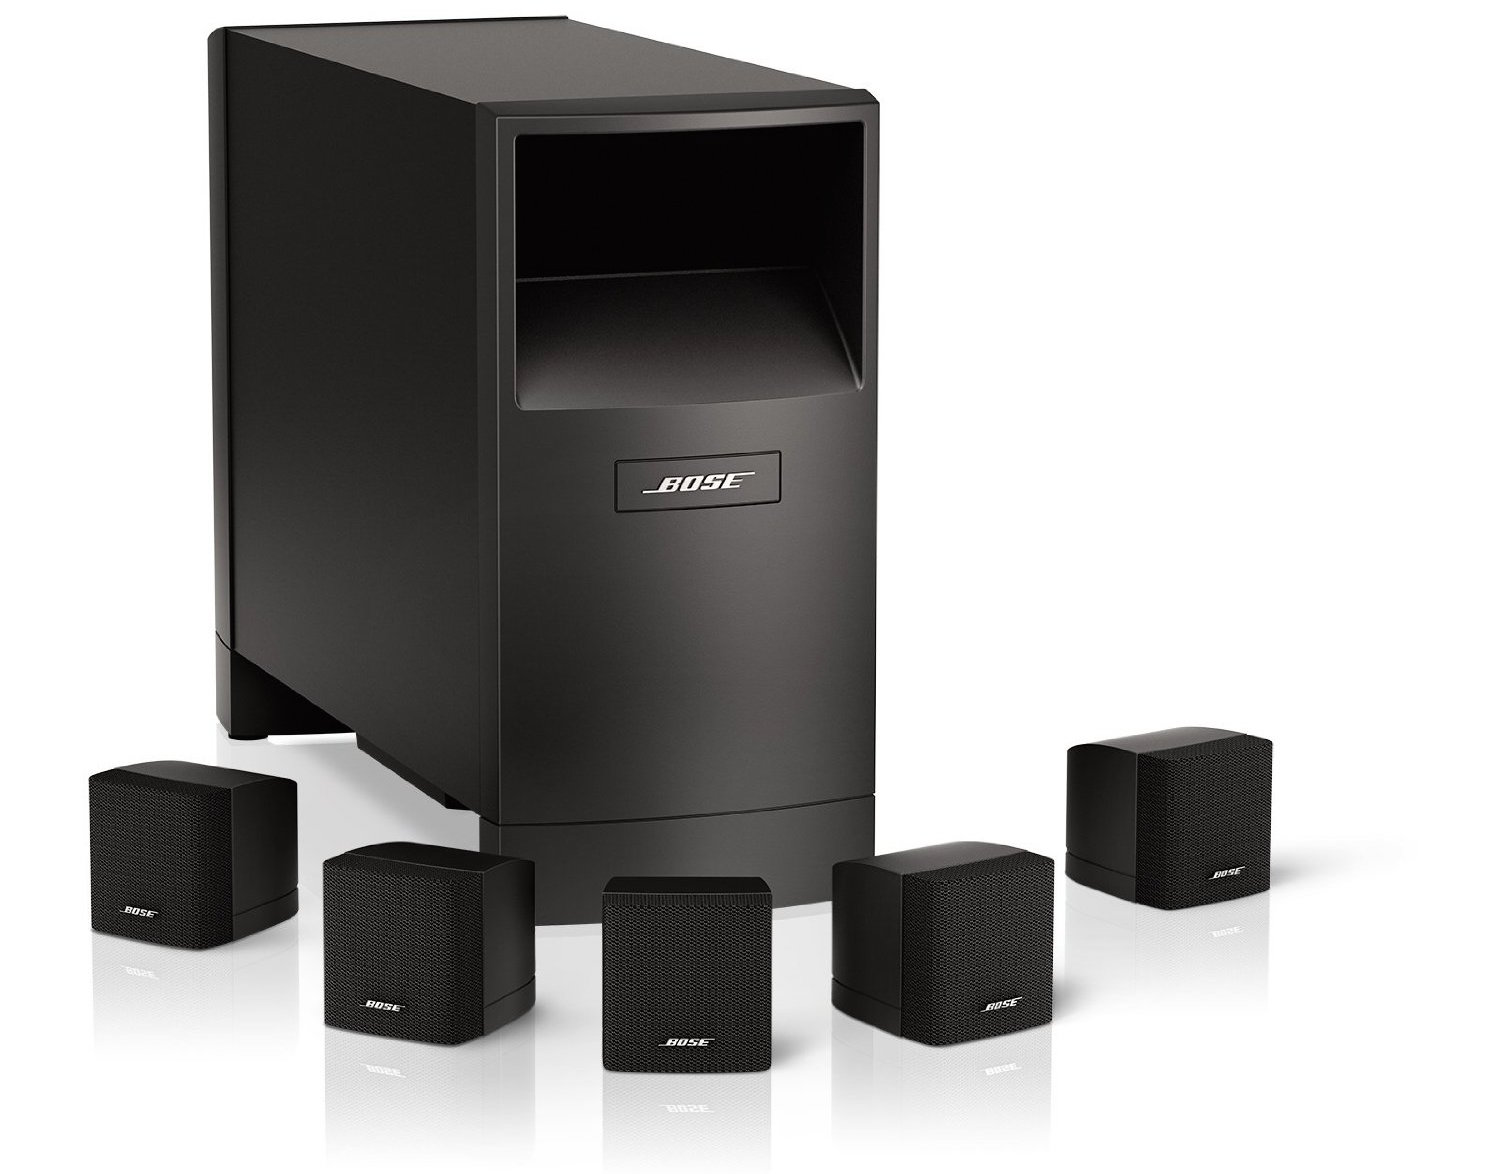 Bose Acoustimass 6 Home 5.1 Entertainment Speaker System: $400 shipped, Acoustimass IV: $650 ($300 off)